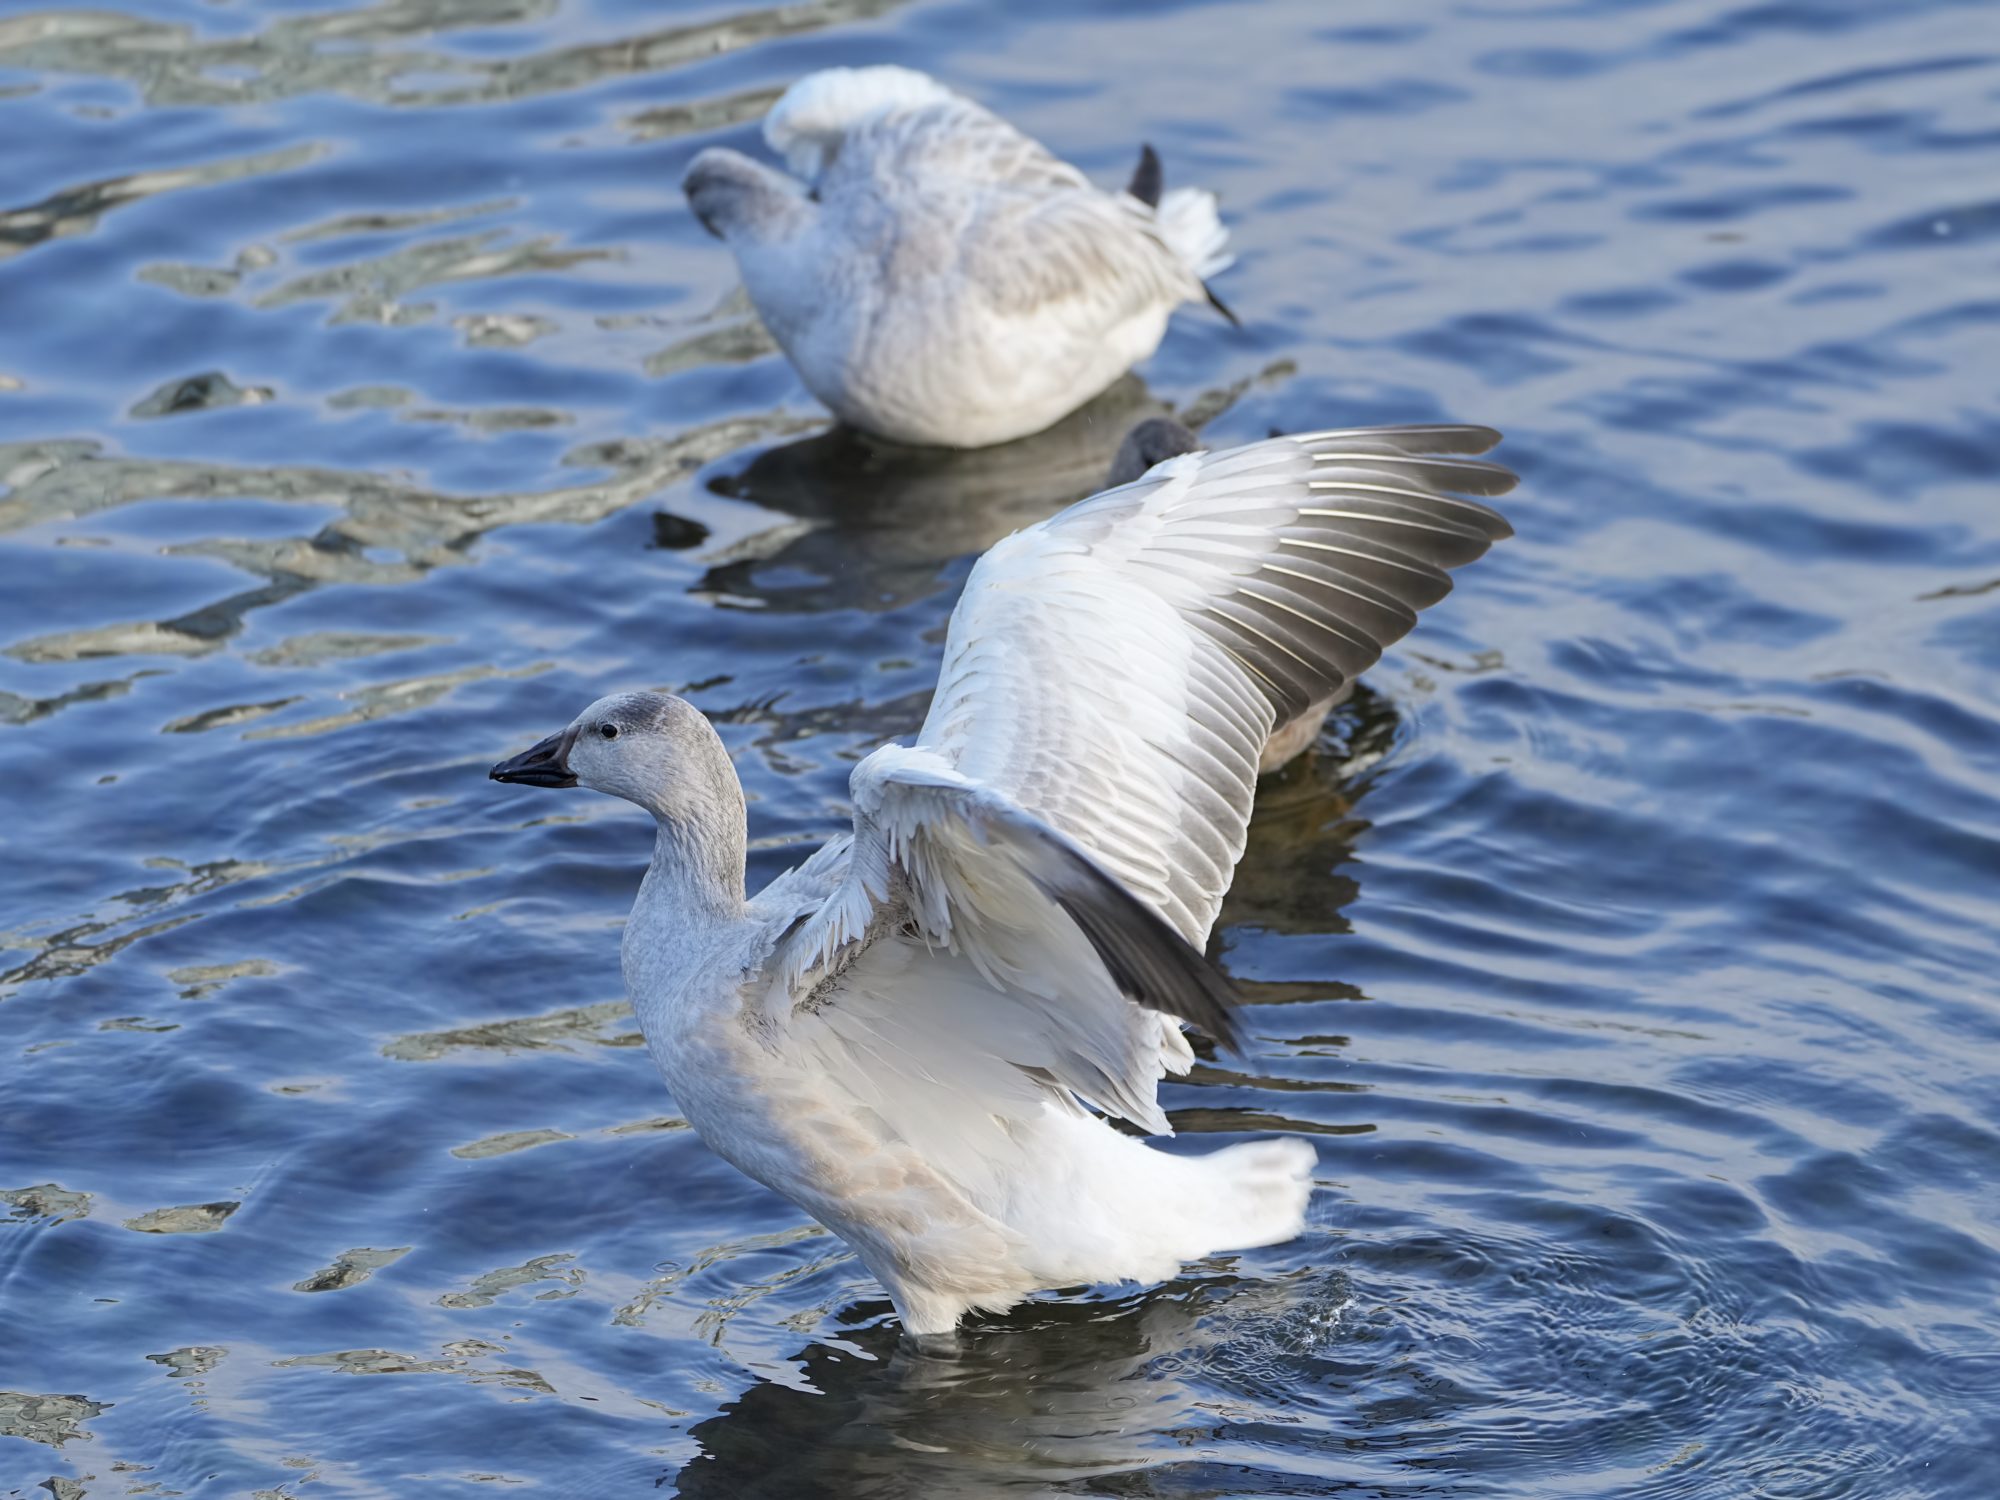 An immature Snow Goose in the foreground, standing belly deep in water and spreading its wings, with another immature Snow Goose preening in the background